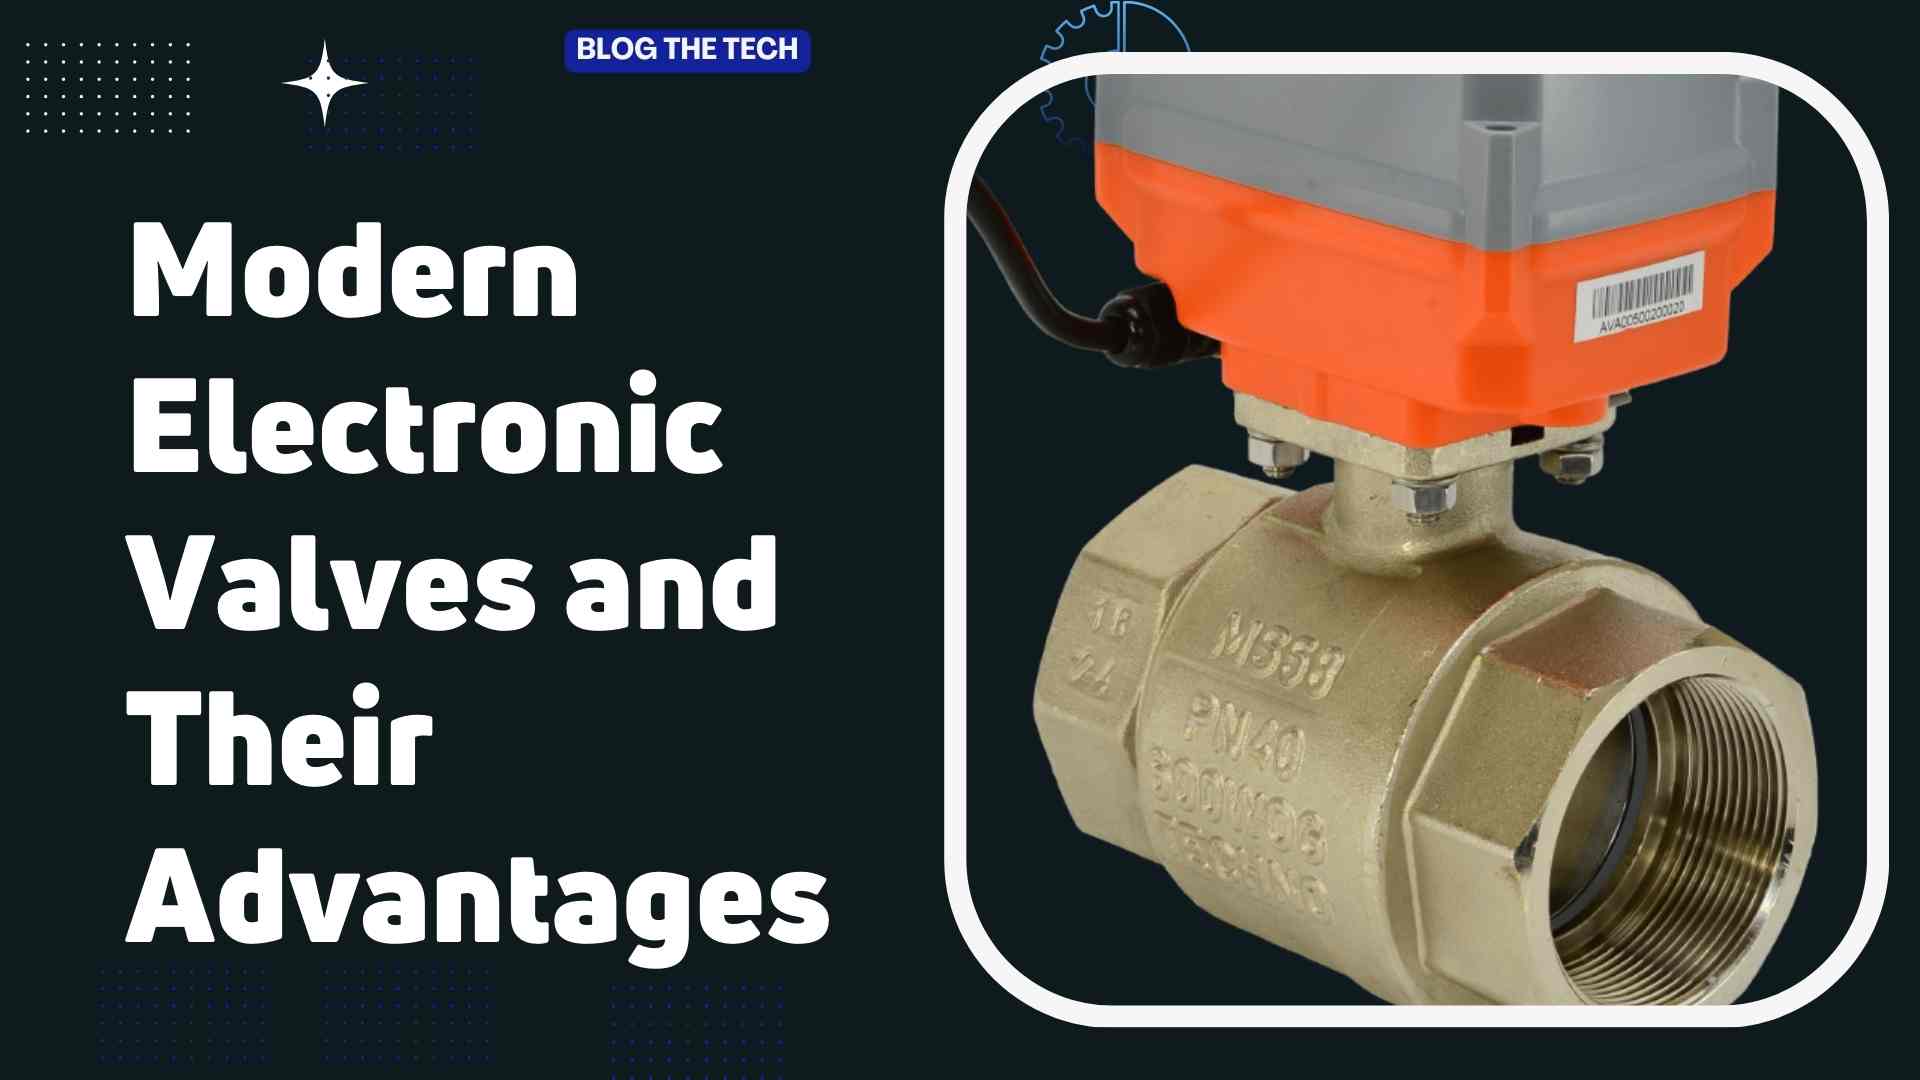 Modern Electronic Valves and Their Advantages